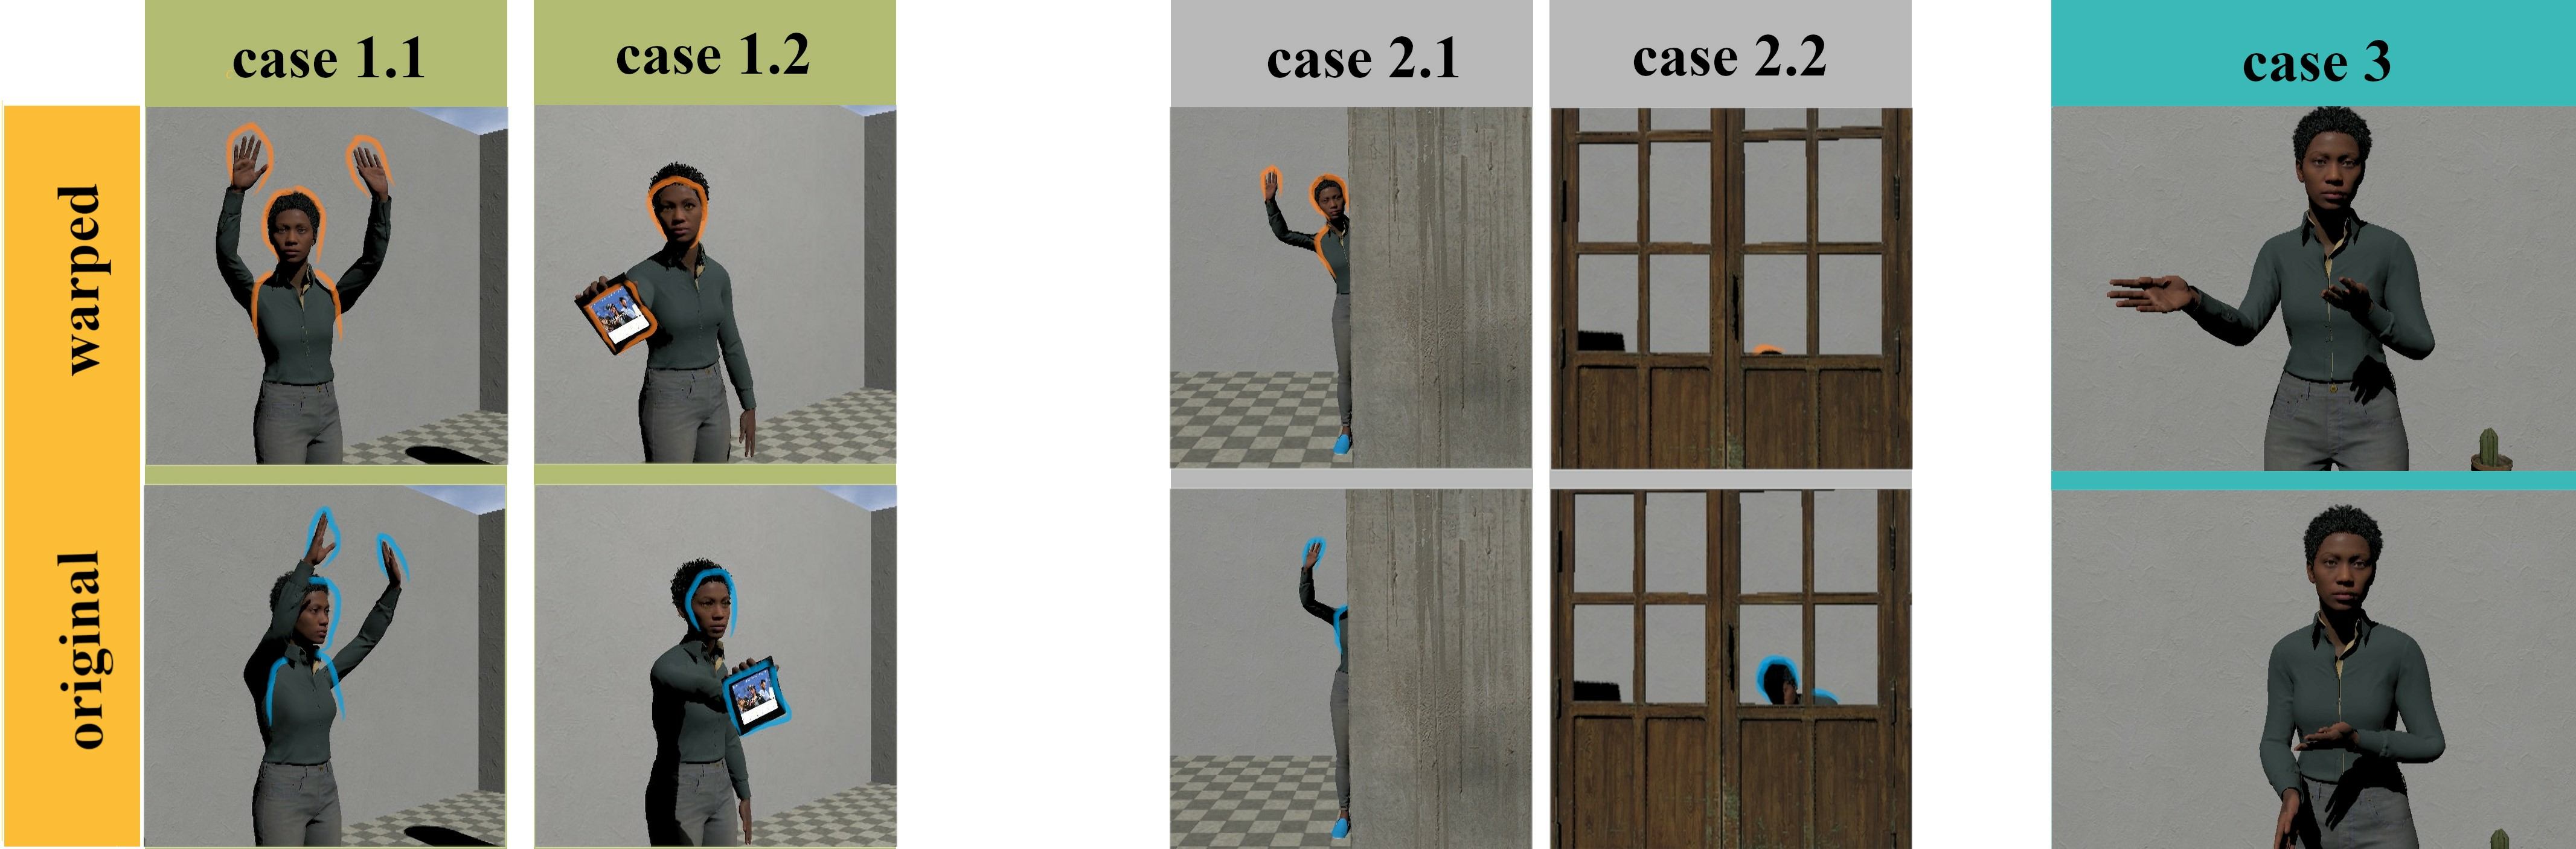 Results from our three use-cases, displayed from the point of vision of the observer. Character parts/objects on which the estimation of visual features is performed are highlighted. On the left (cases 1.1 and 1.2), we study the influence of viewpoint changes for a character with and without an object. The desired visual feature consisted in increasing the visual coverage. In the middle (cases 2.1 and 2.2), we study the influence of solid and sparse occluders. Visual coverage was also used as the regulating visual motion feature. On the right (case 3) we explore how extraverted effects can be created by applying upper body warping units, and regulating their apparent vertical and horizontal extension. In the picture, the amplitude of the gesture of the warped character is wider with respect to the original non-warped one, making it feel more extraverted.